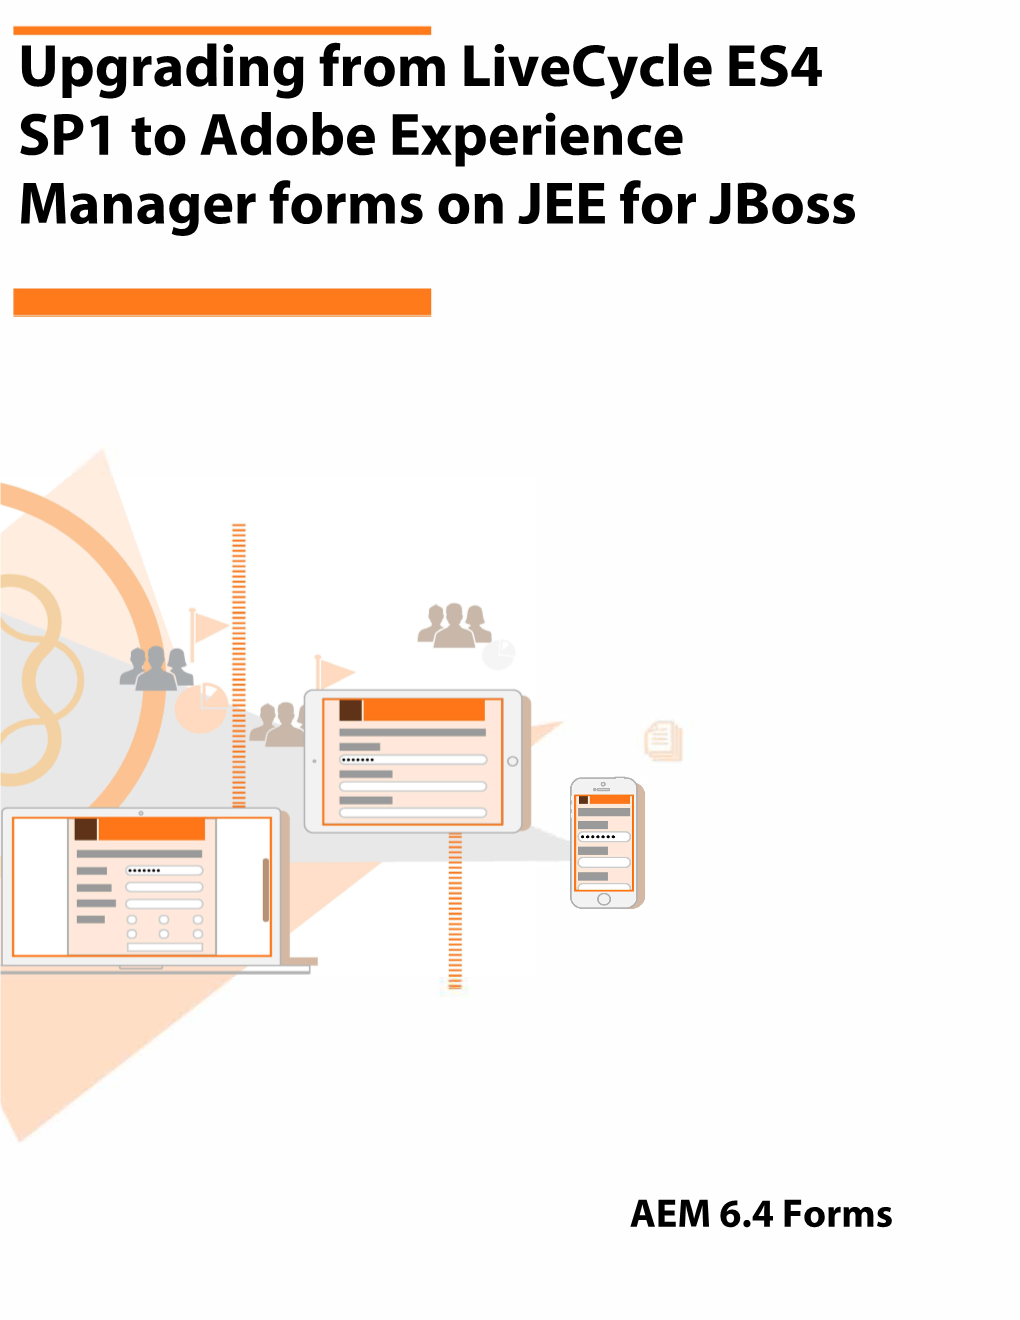 Upgrading from Livecycle ES4 SP1 to Adobe Experience Manager Forms on JEE for Jboss